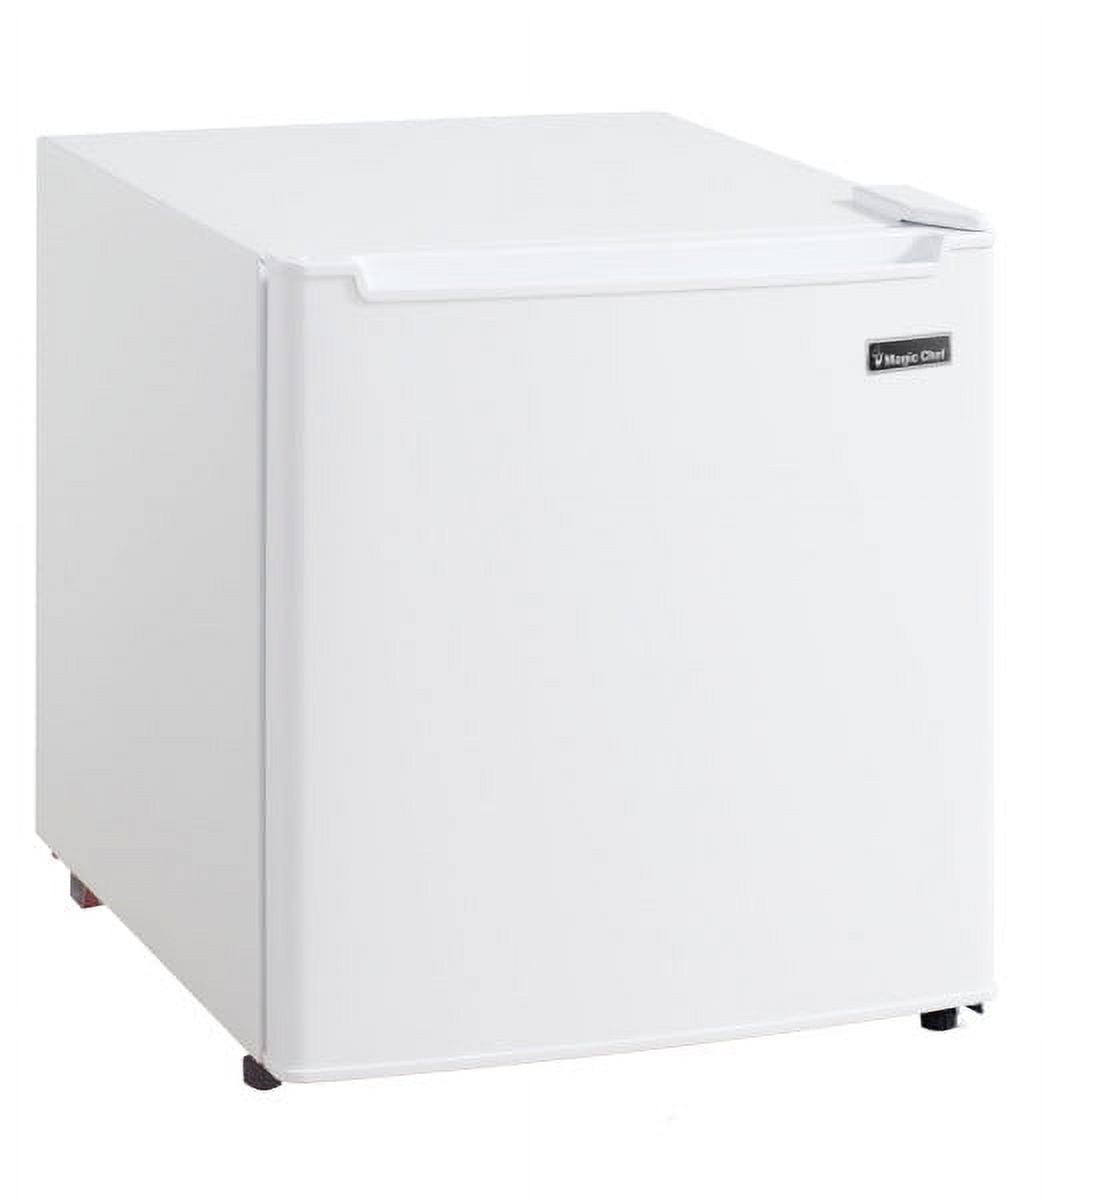 Picture of Magic Chef MCR170WE 1.7 cu. ft. Mini Refrigerator with Chiller Compartment - White